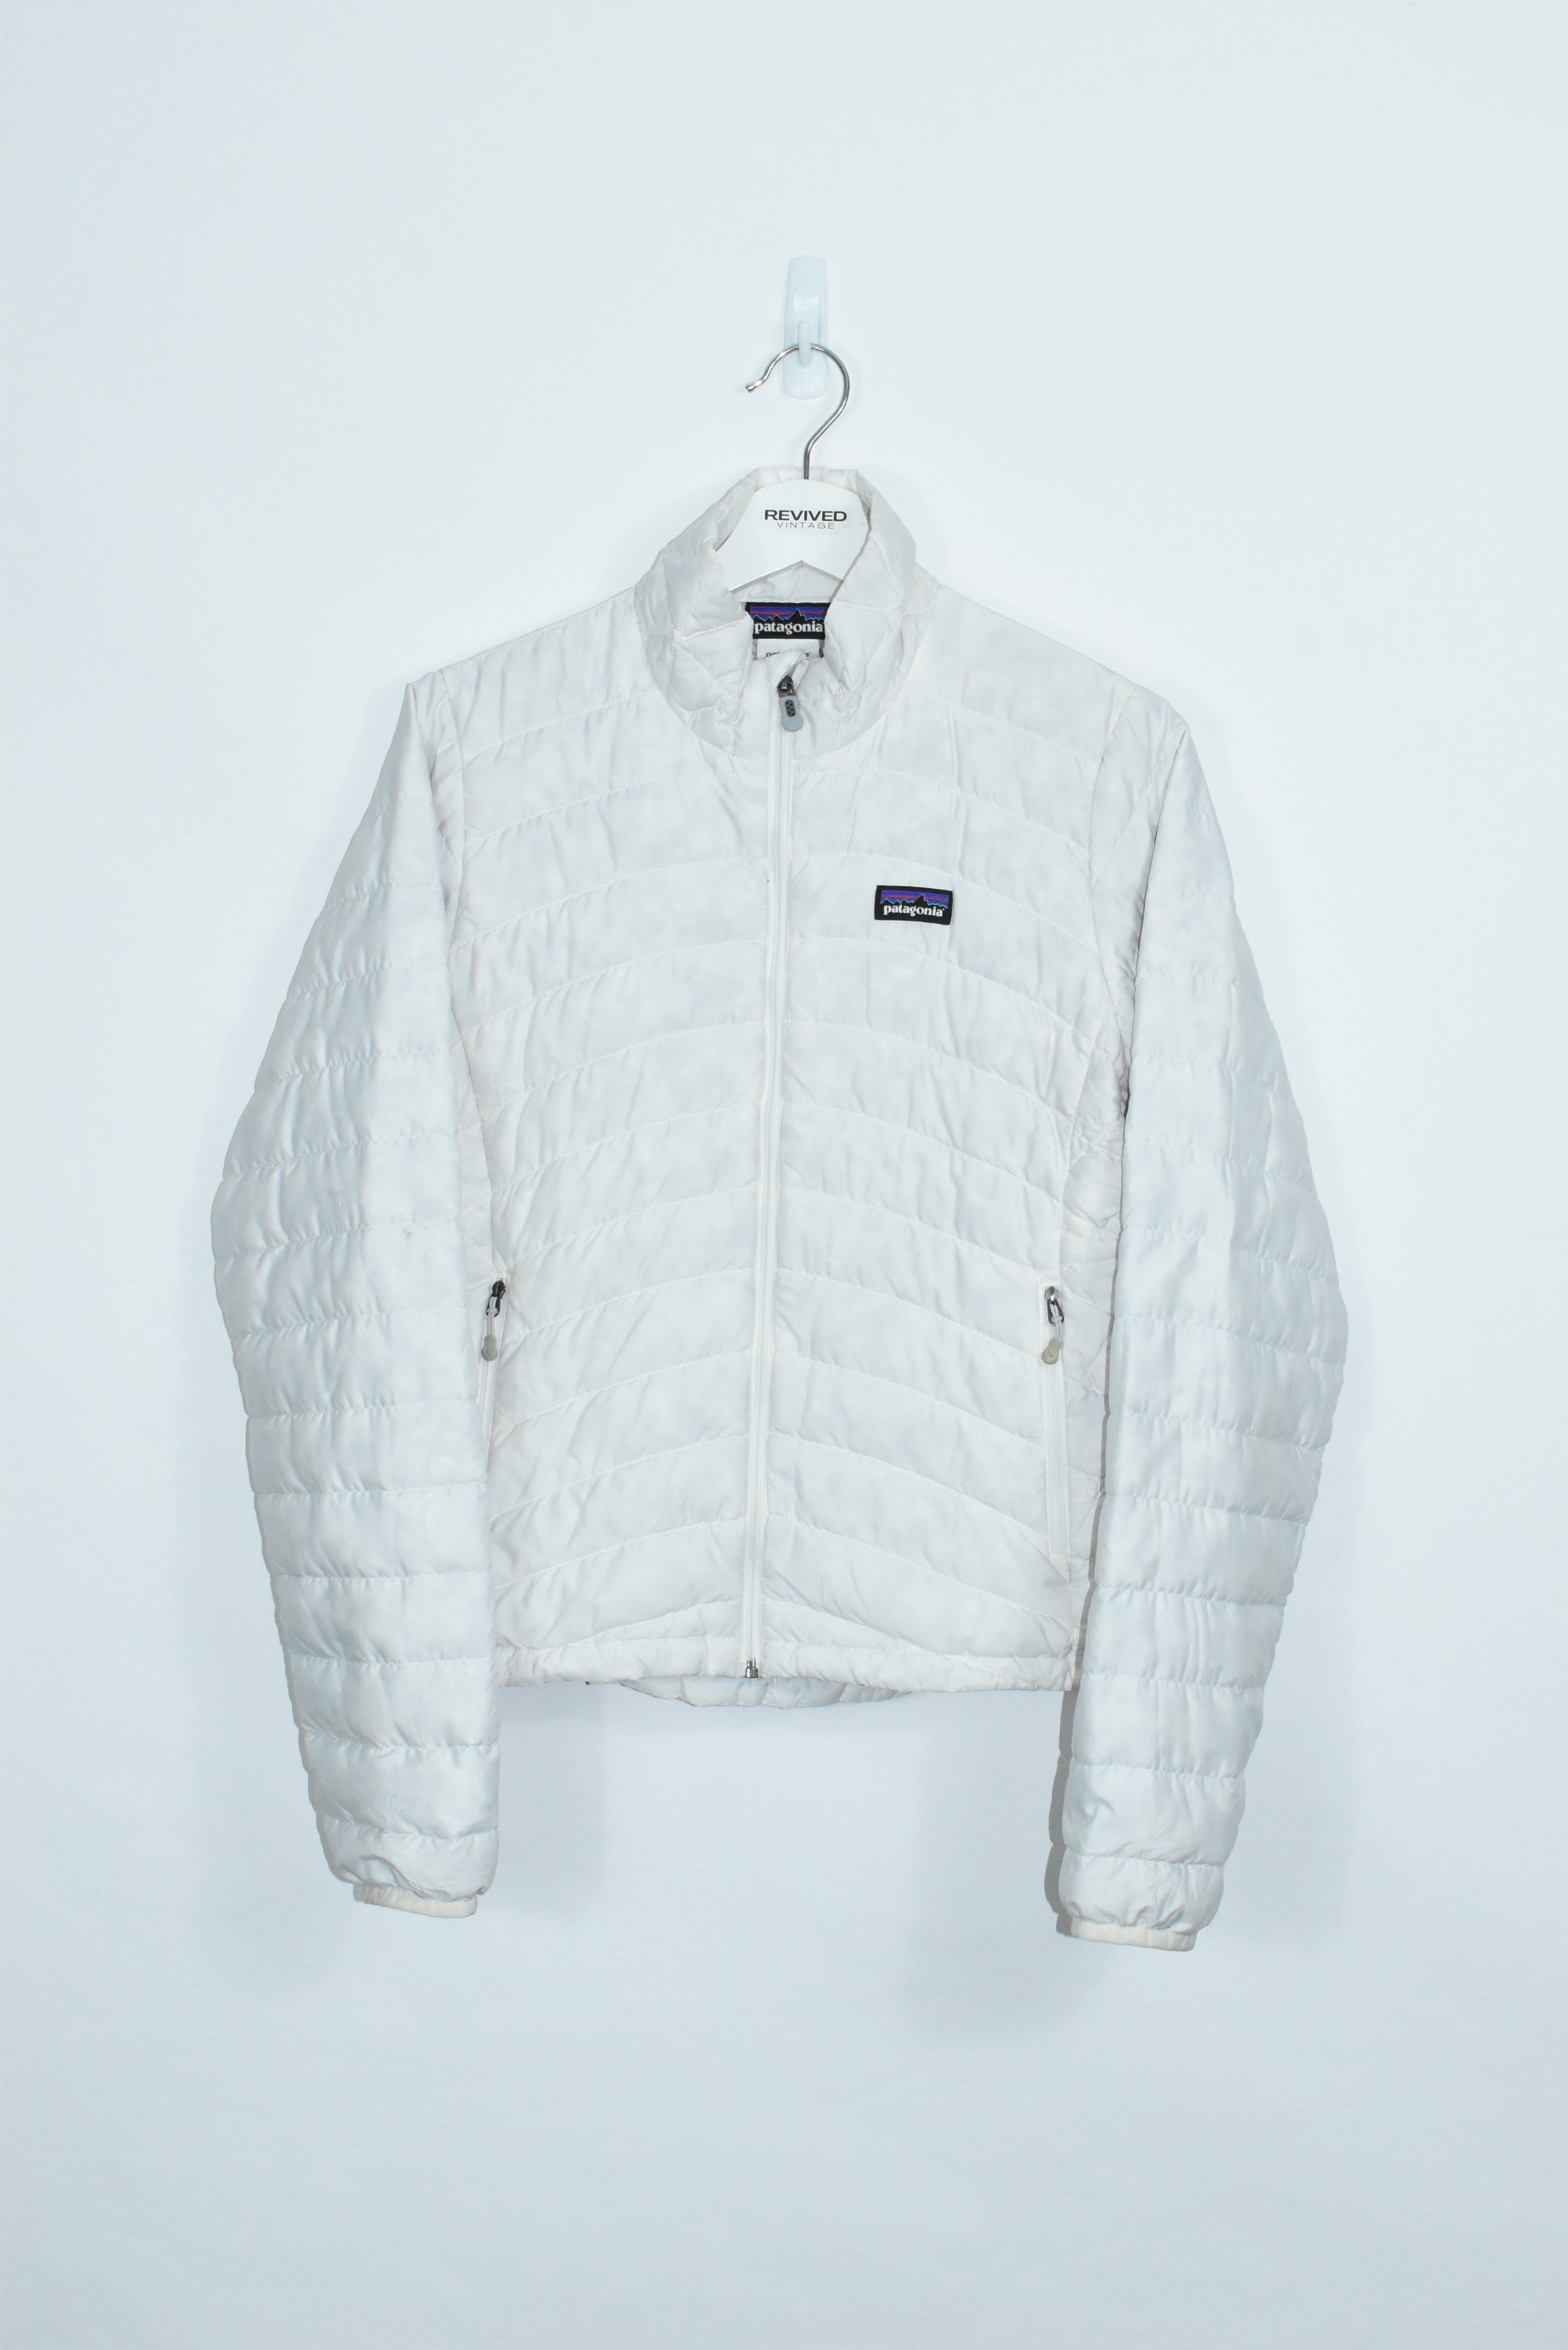 Vintage Patagonia White Puffer SMALL (Womens)